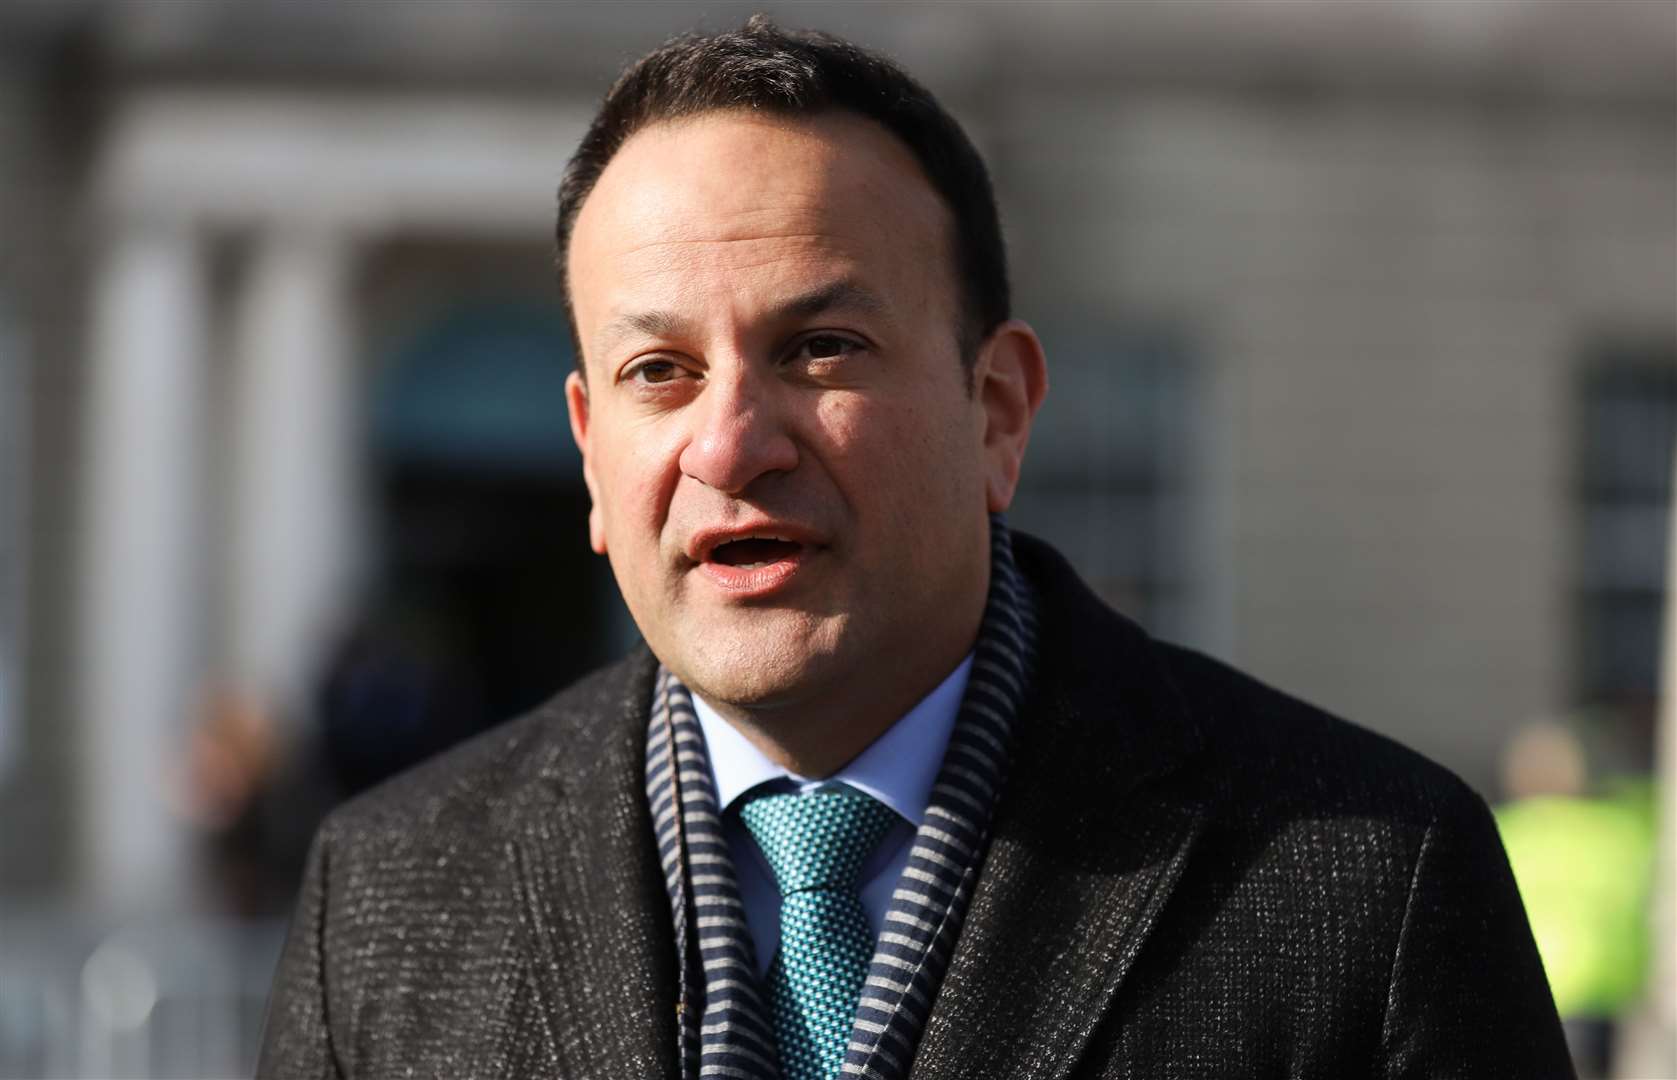 Tanaiste Leo Varadkar has said it is not the right time for a border poll in Ireland (Damien Storan/PA)